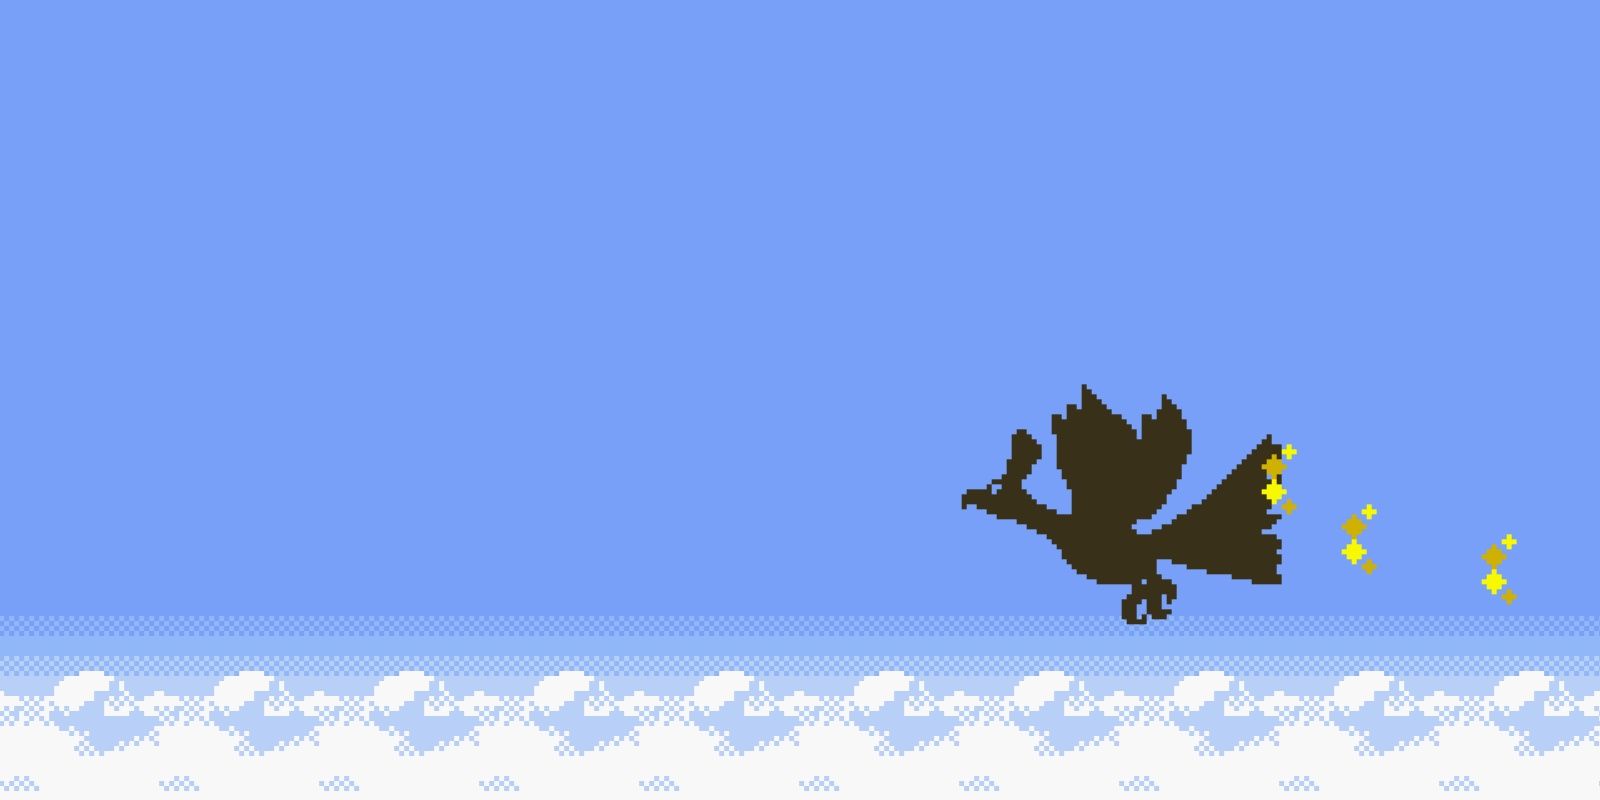 A Ho-Oh silhouette flies above the clouds in Pokemon Gold